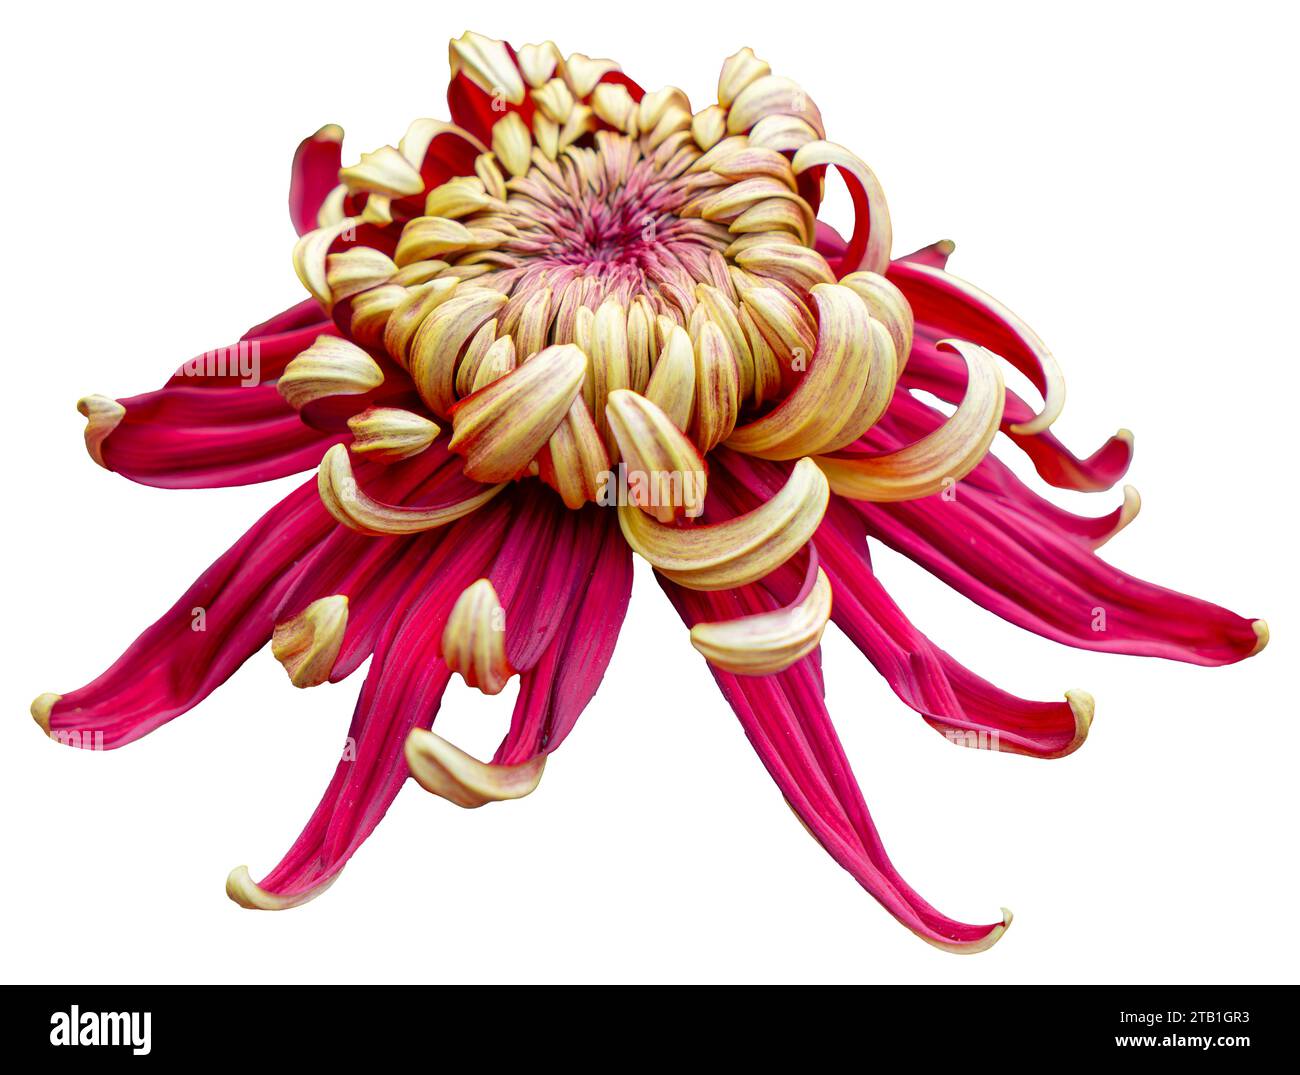 One yellow and red flower isolated on white background. Isolate a large flower with clipping path. Taipei Chrysanthemum Exhibition. Stock Photo